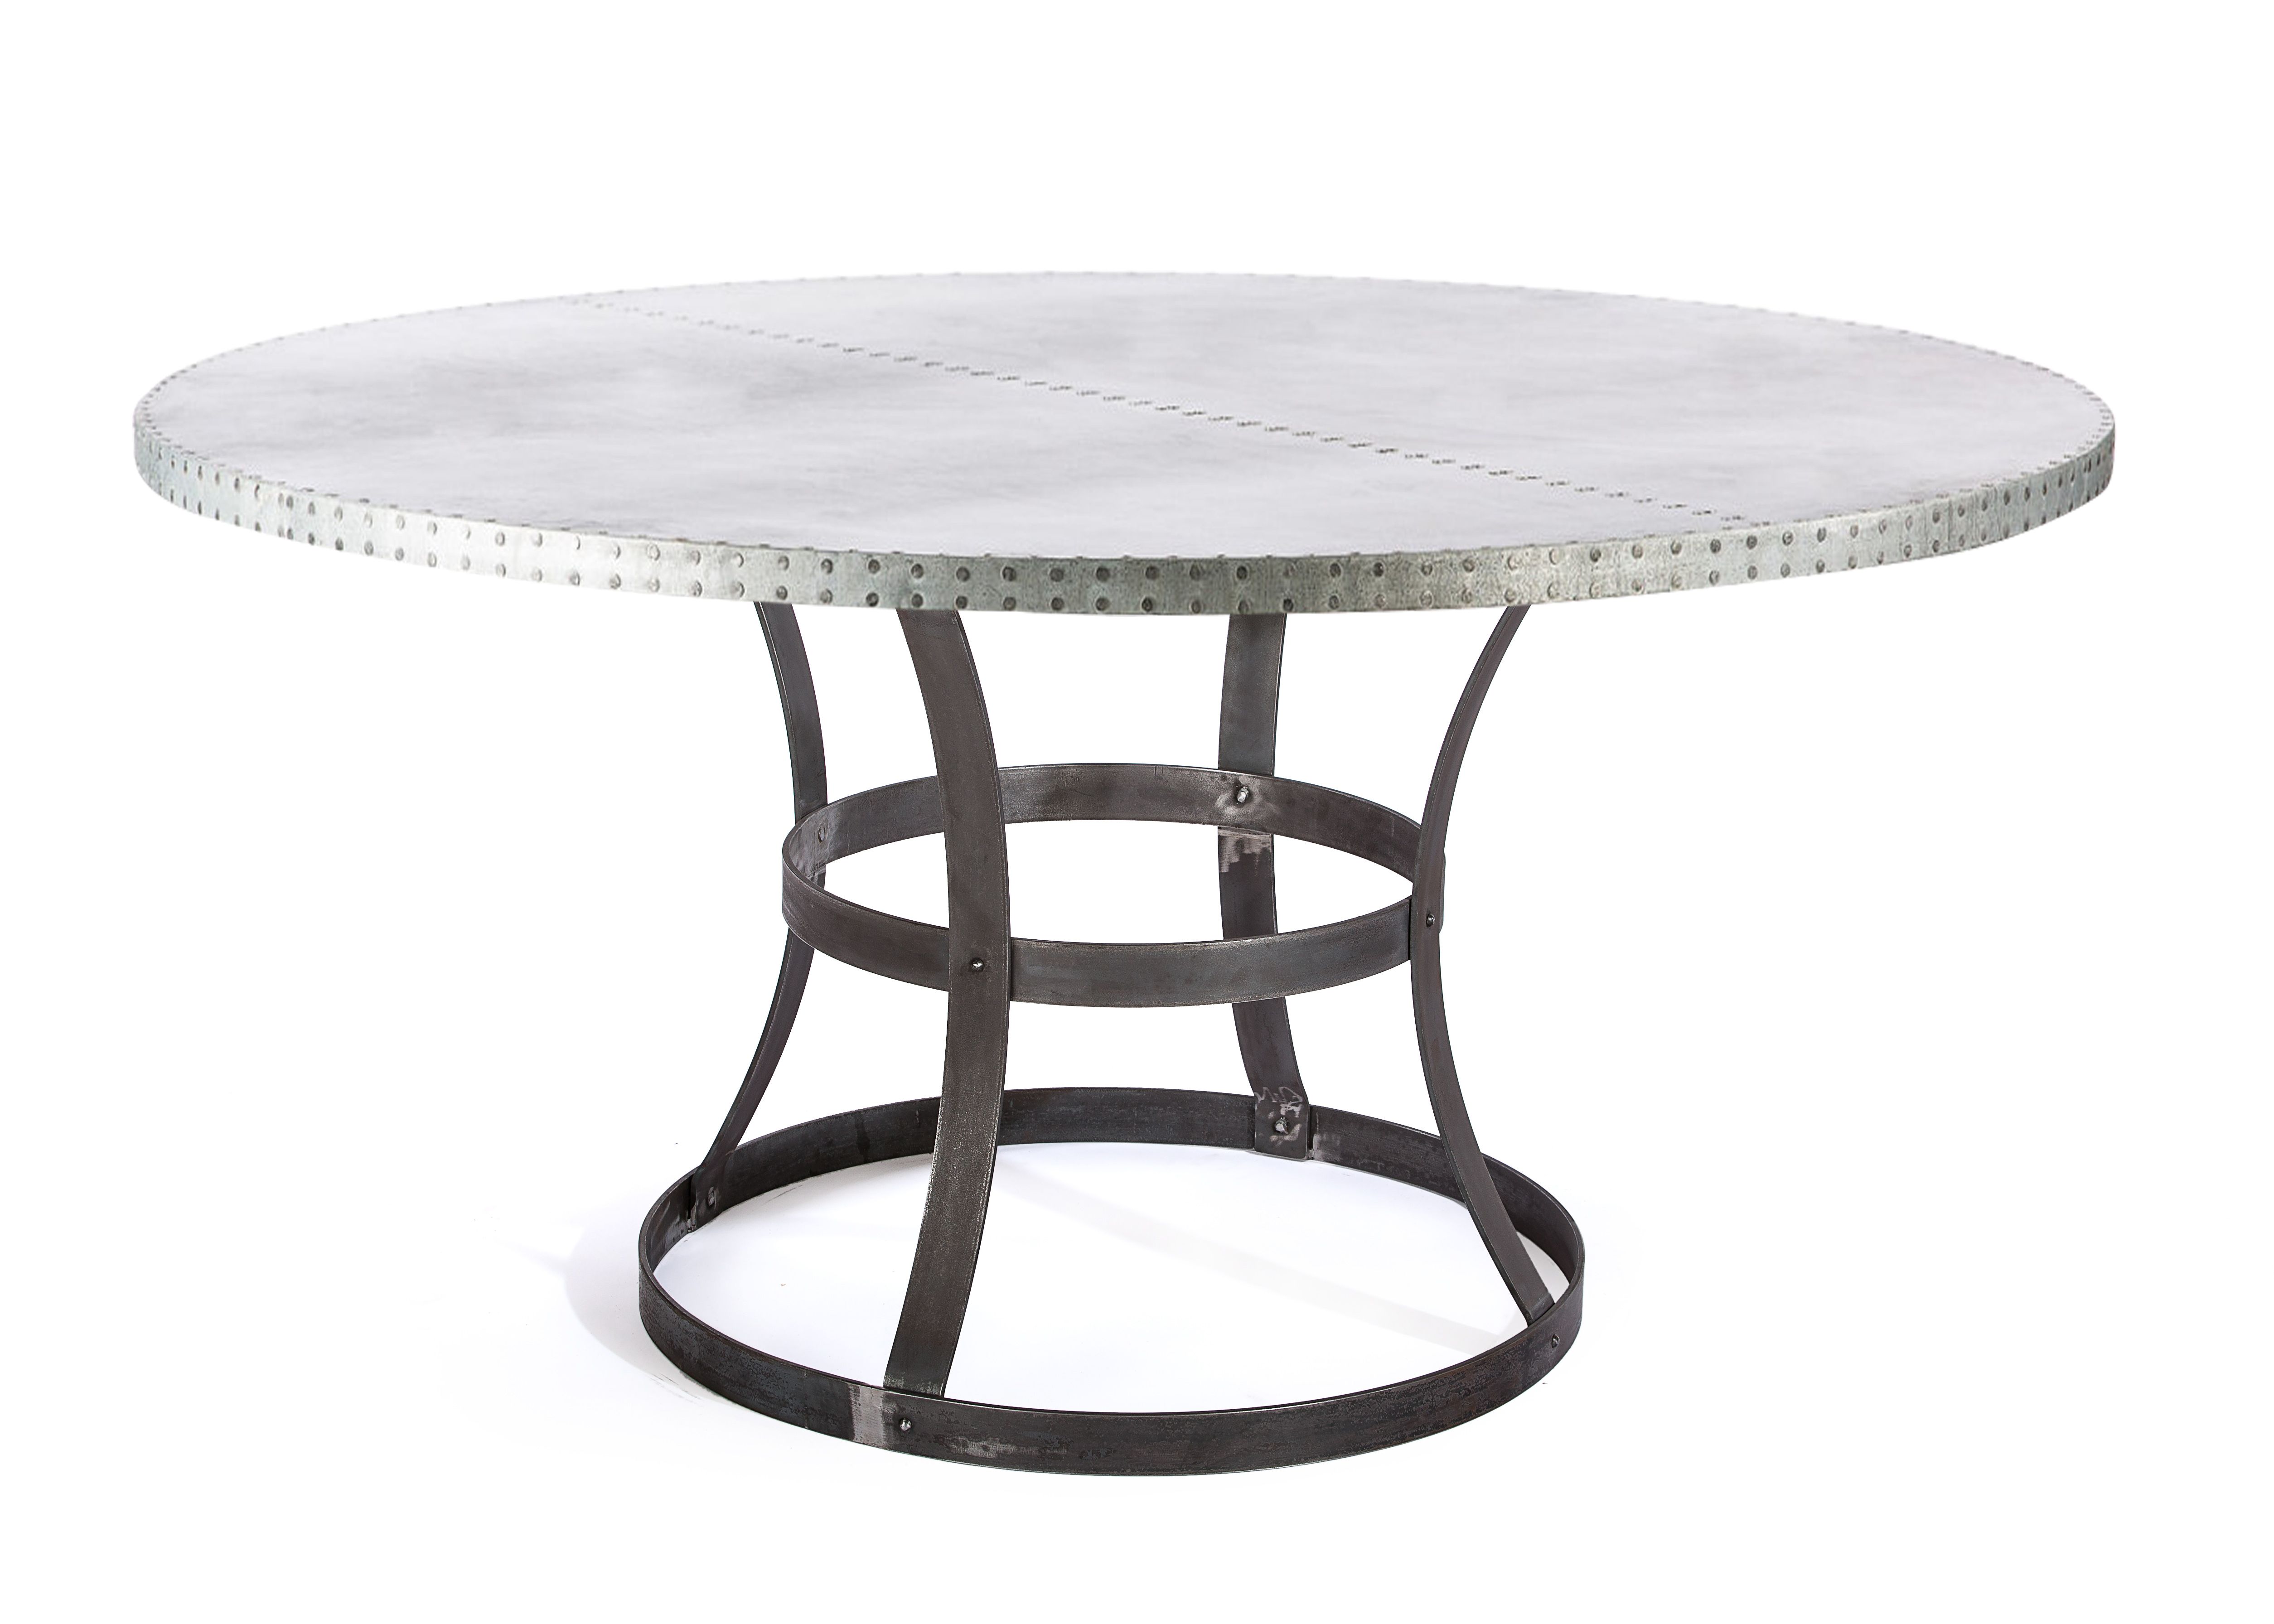 Buy Custom Made Zinc Table Zinc Dining Table Madera Steel Ring Round Zinc Top Table